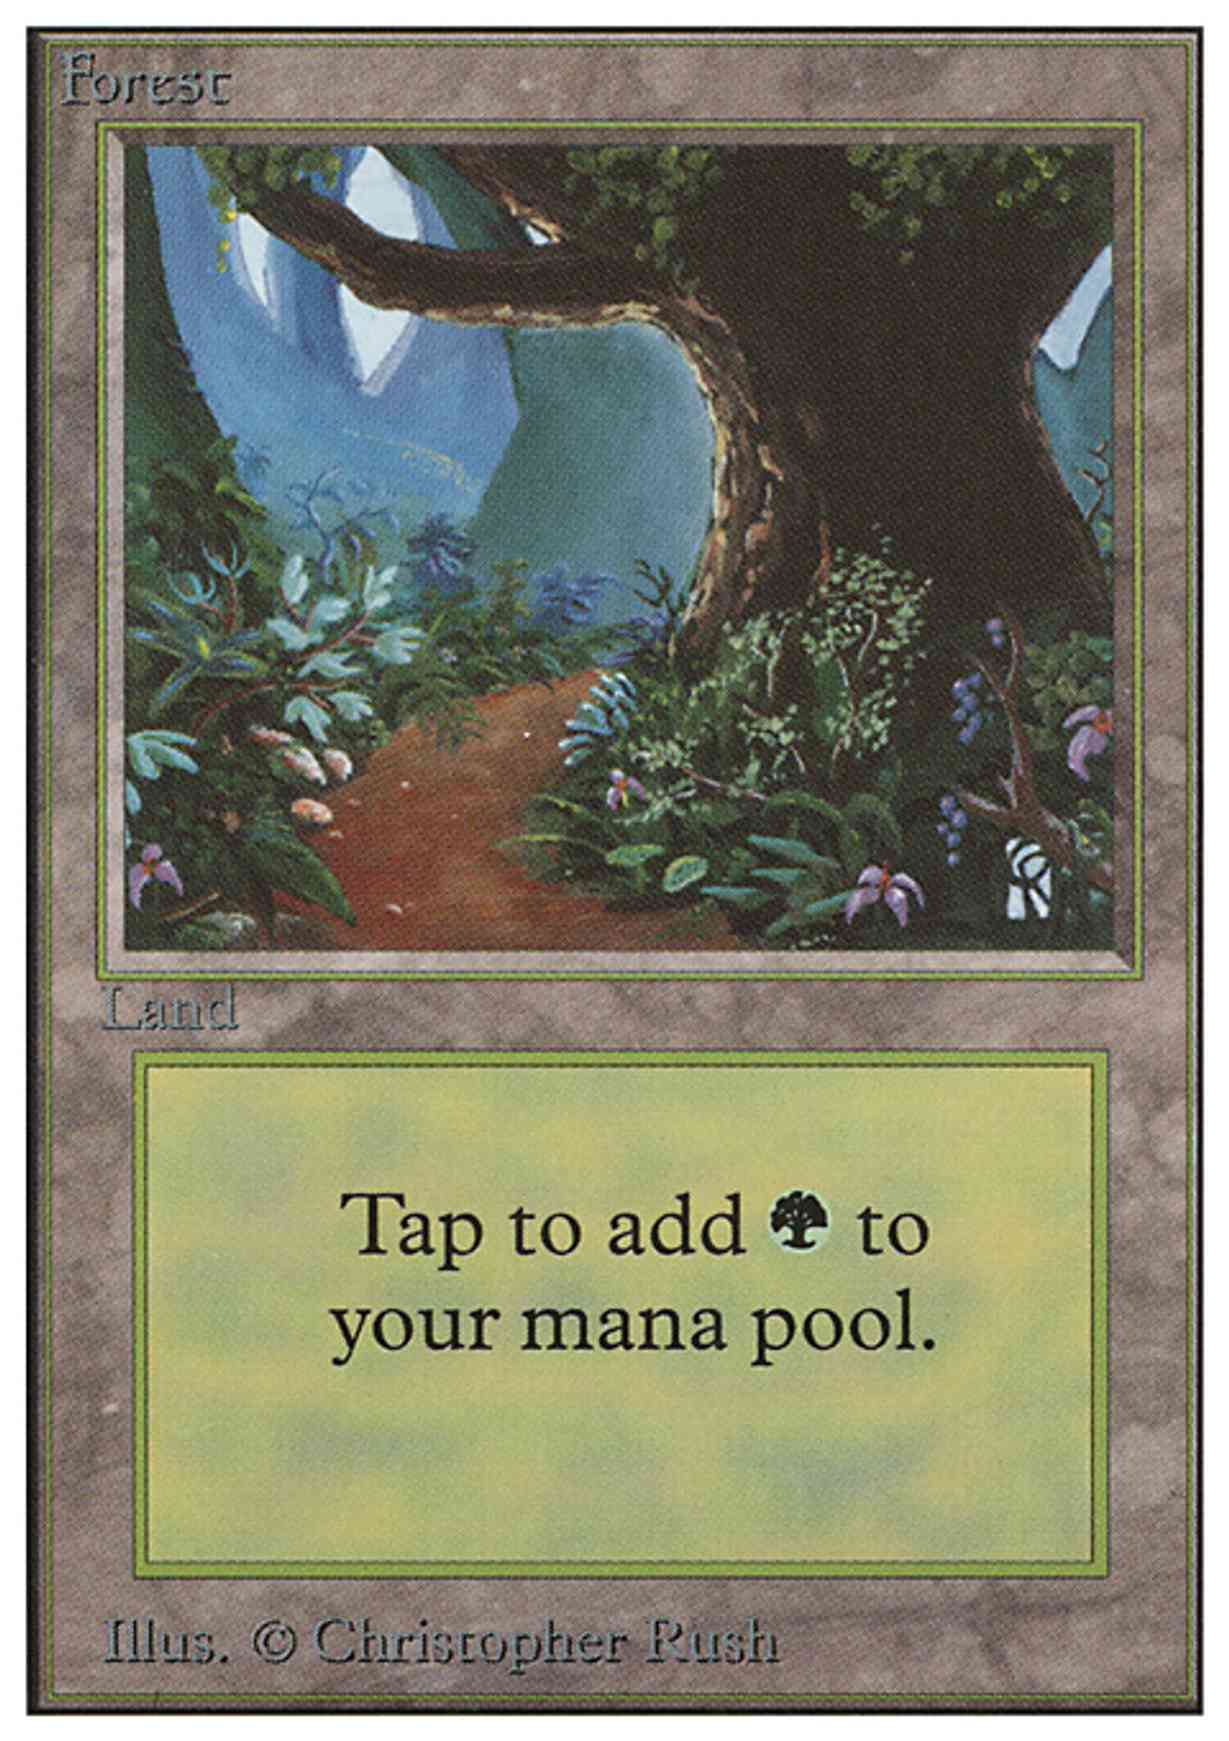 Forest (B) magic card front